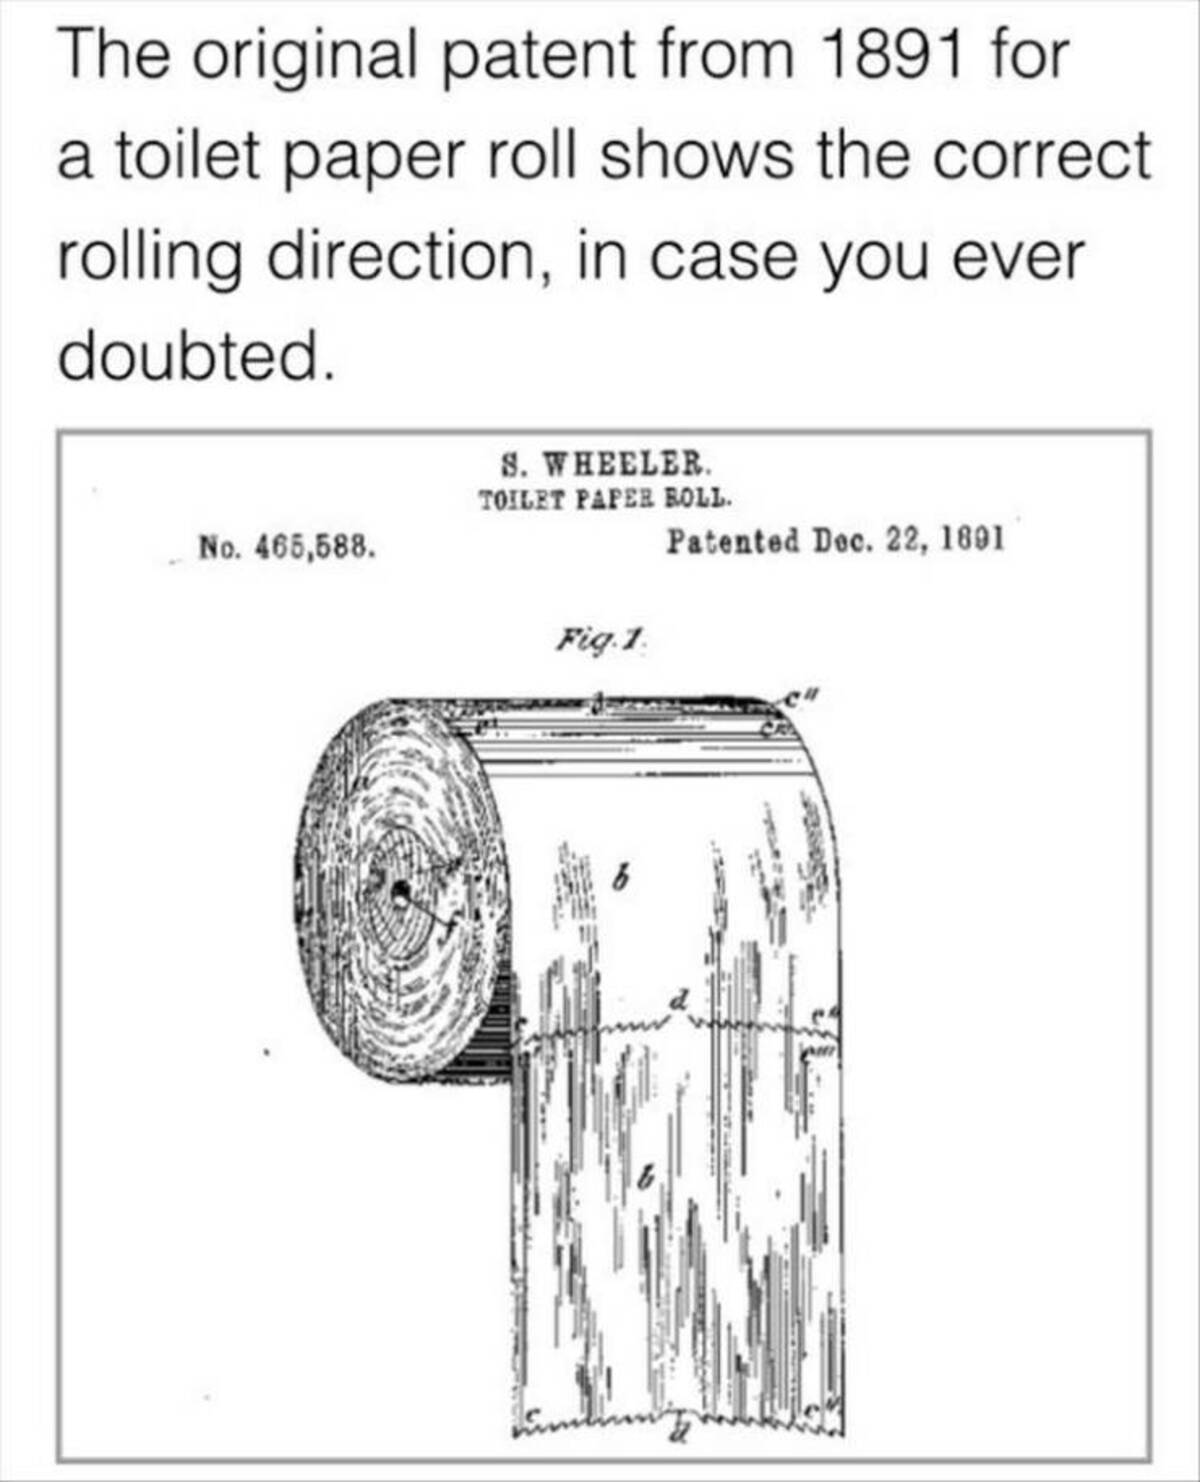 The original patent from 1891 for a toilet paper roll shows the correct rolling direction, in case you ever doubted. No. 465,588. S. Wheeler. Toilet Paper Boll. Fig.1. Patented Dec. 22, 1891